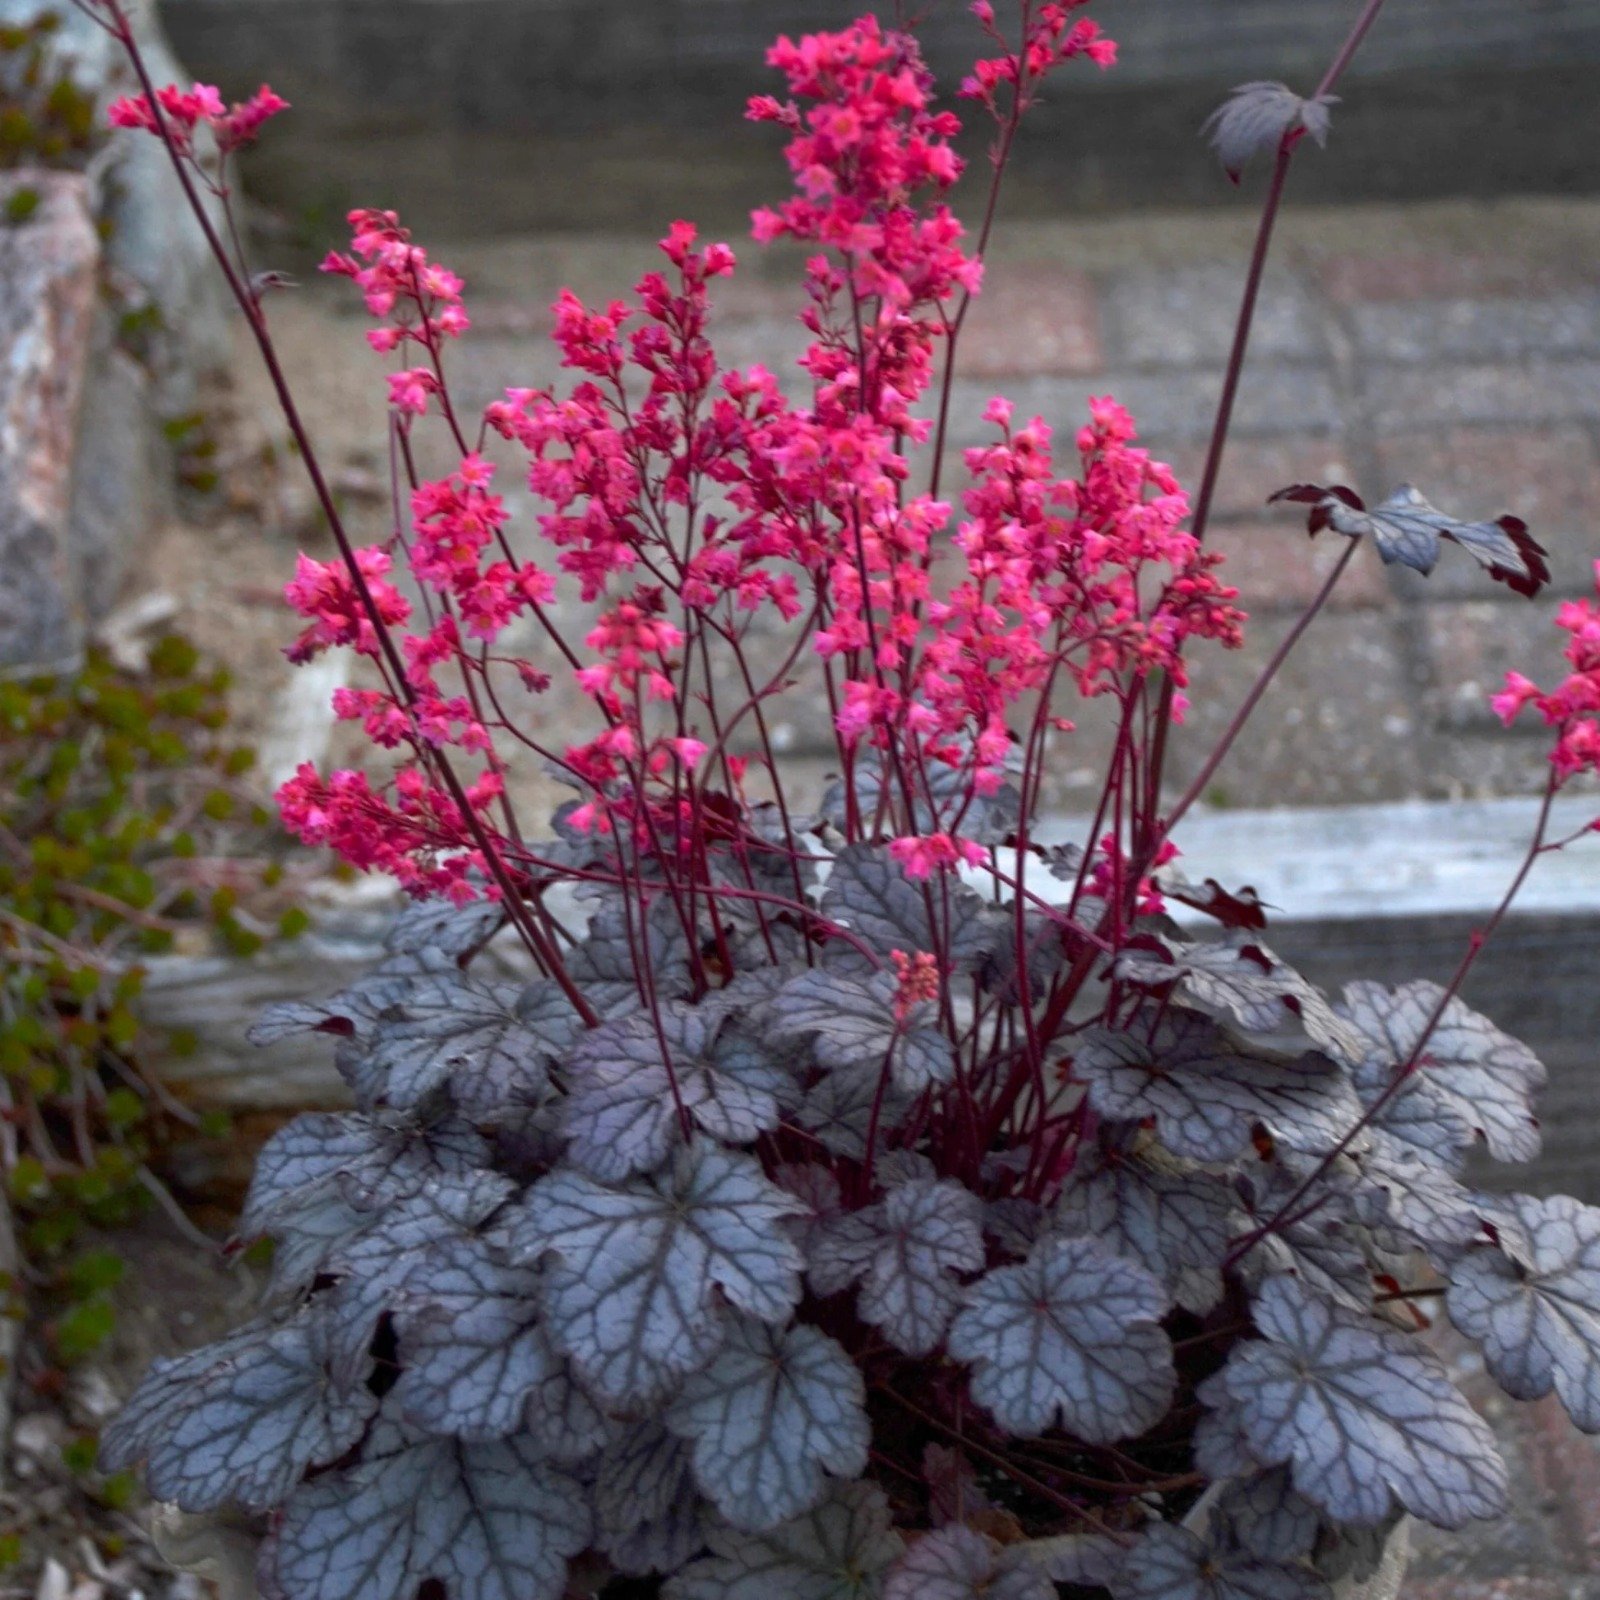 Coral Bells (Heuchera): Vibrant red foliage with delicate white flowers on slender stems.

